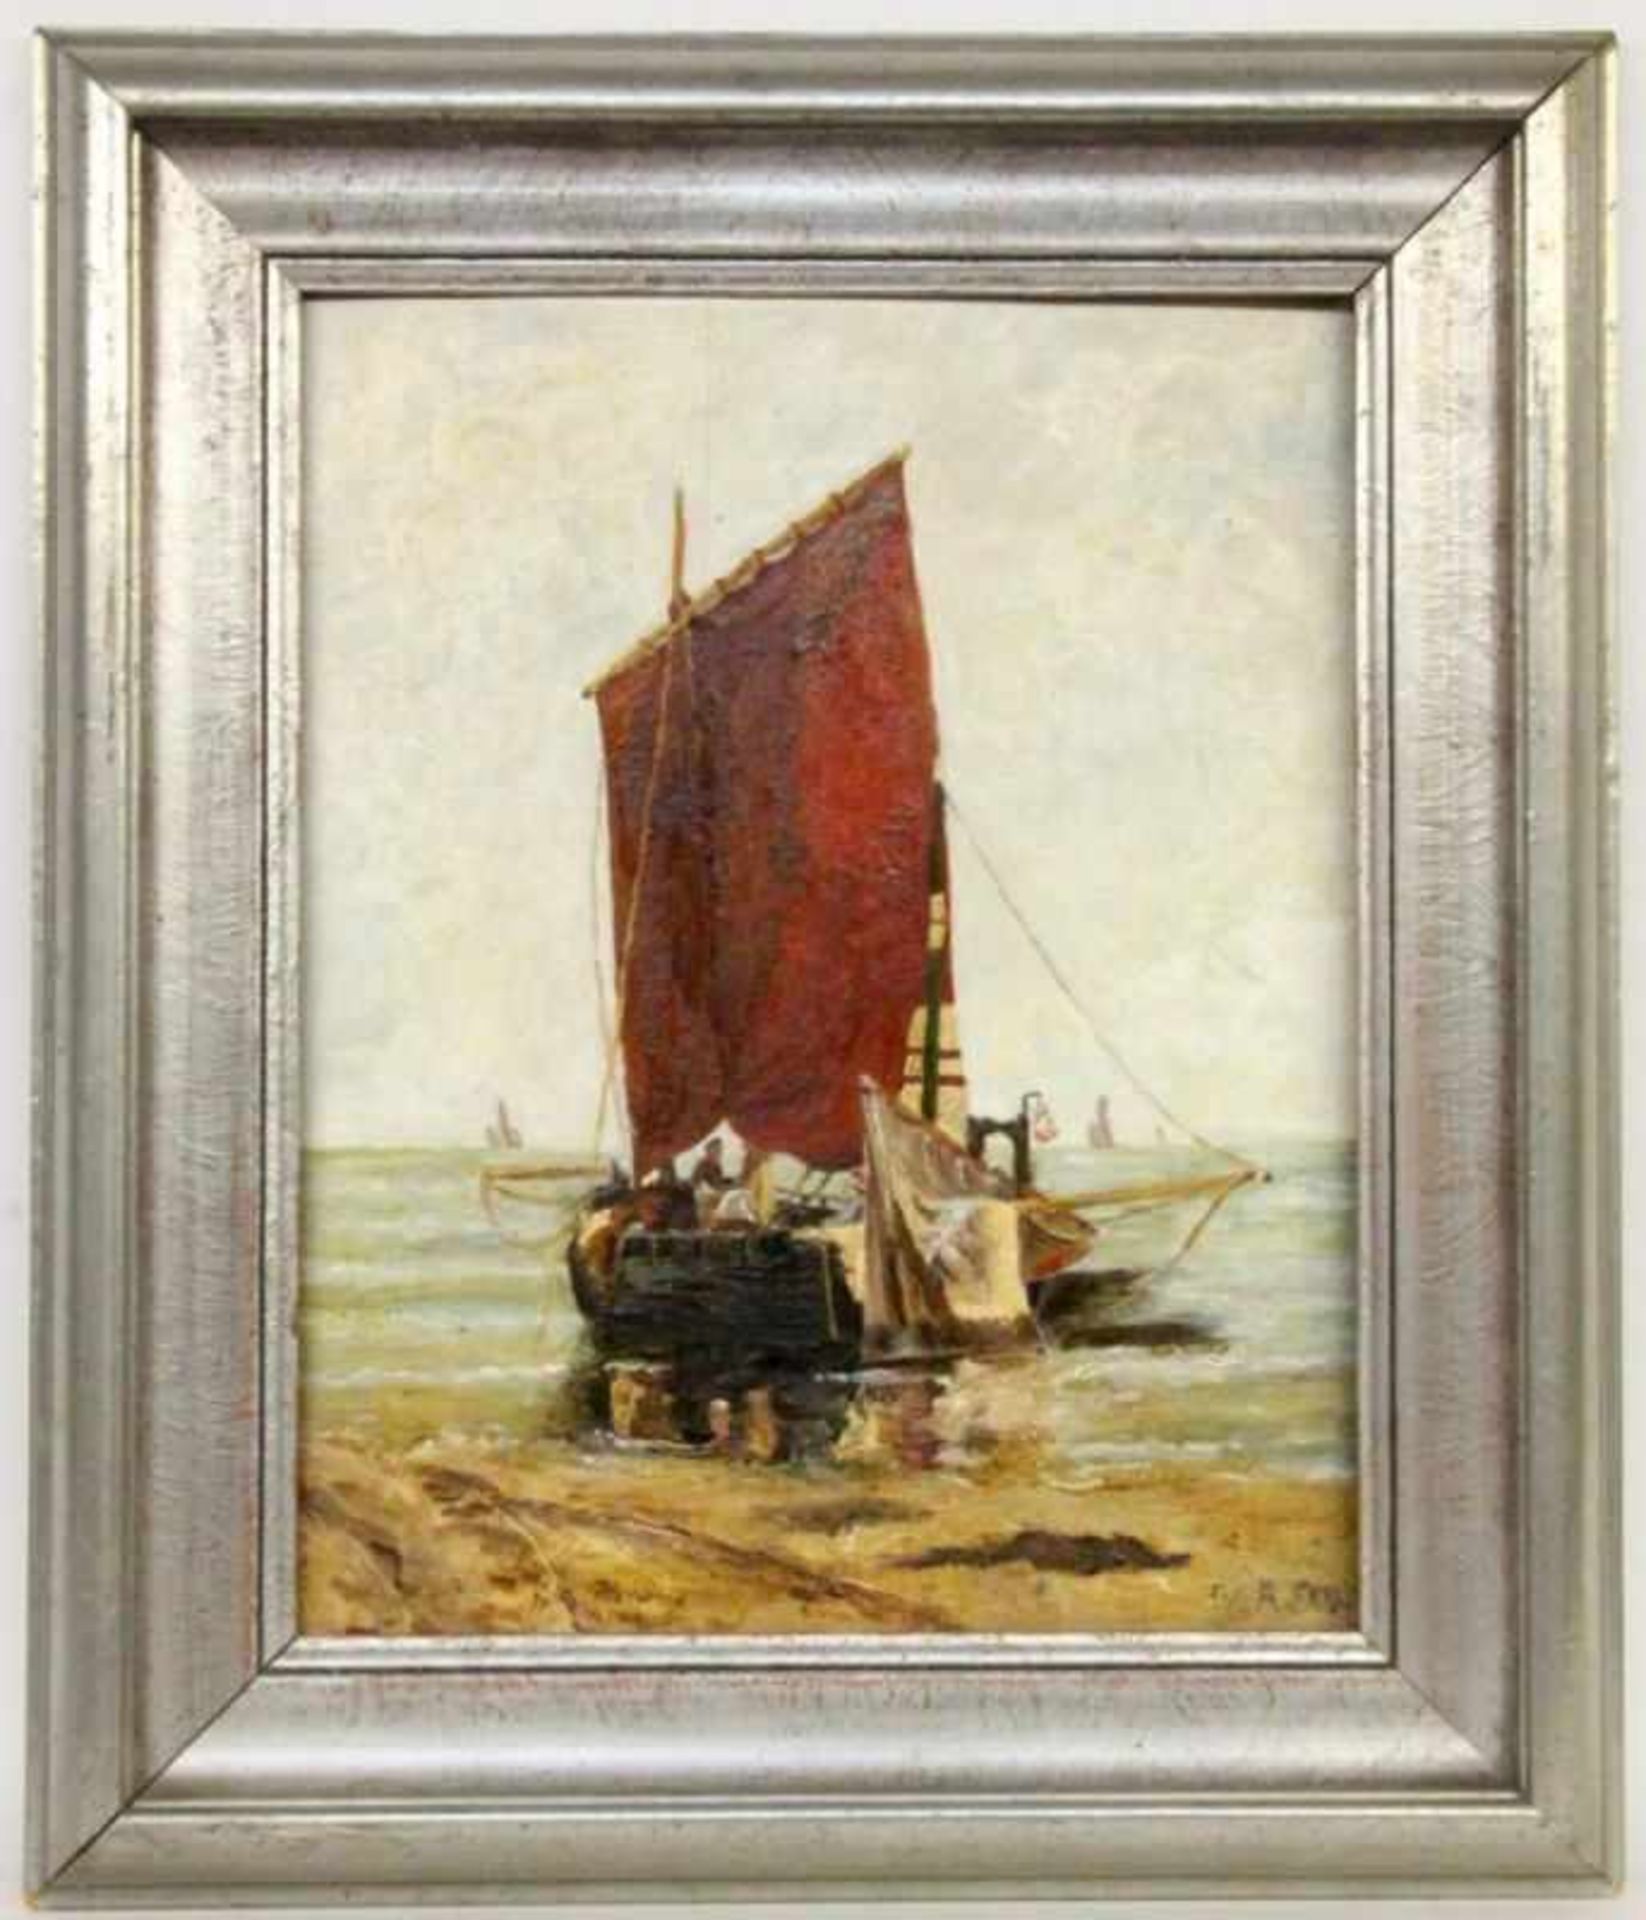 FEIL, ANNE 1946 Fishing Boat with Fishermen on the Beach. Oil on panel, signed. Inscribedand dated